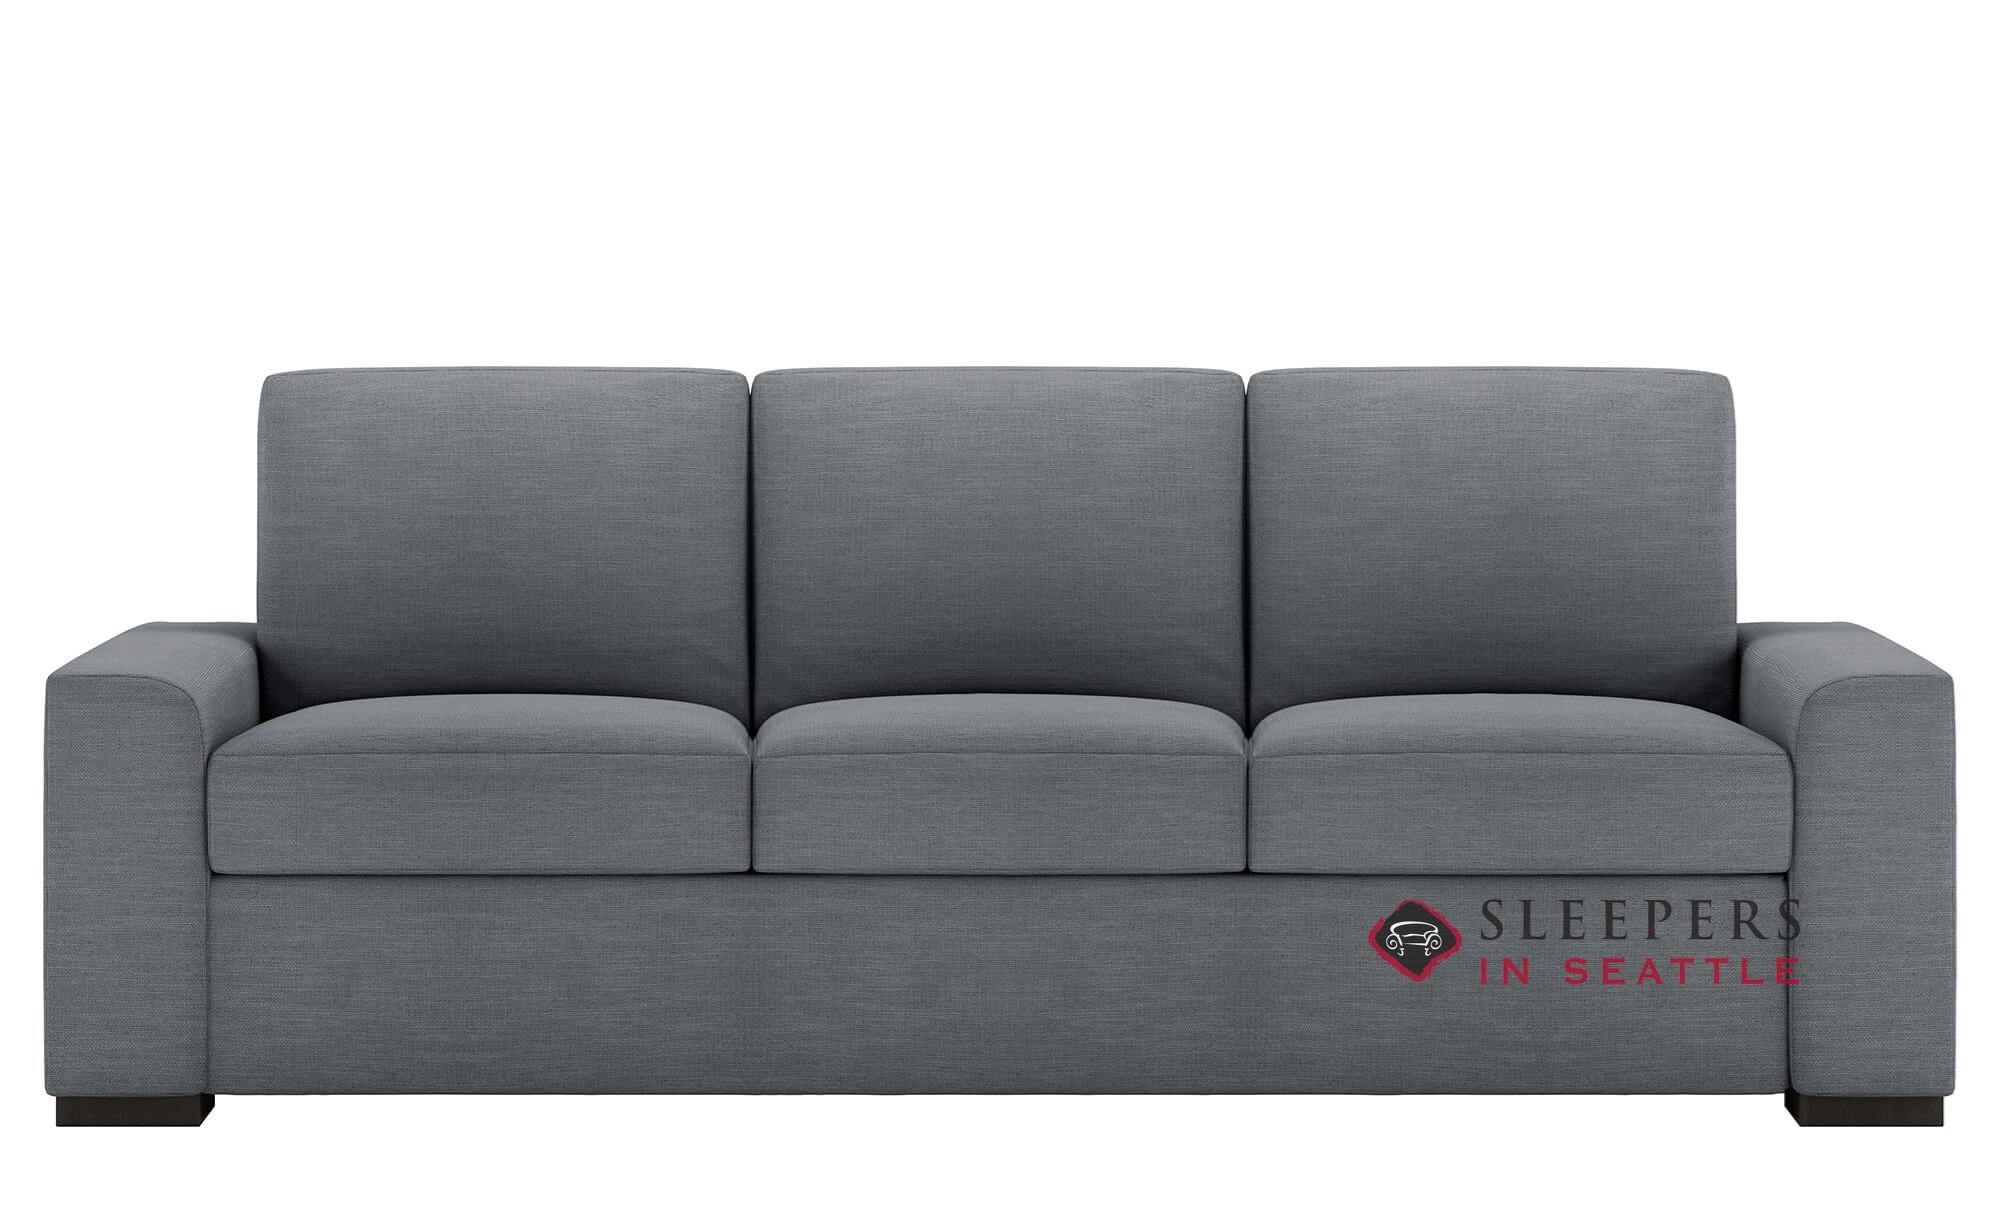 american leather queen sleeper sofa price